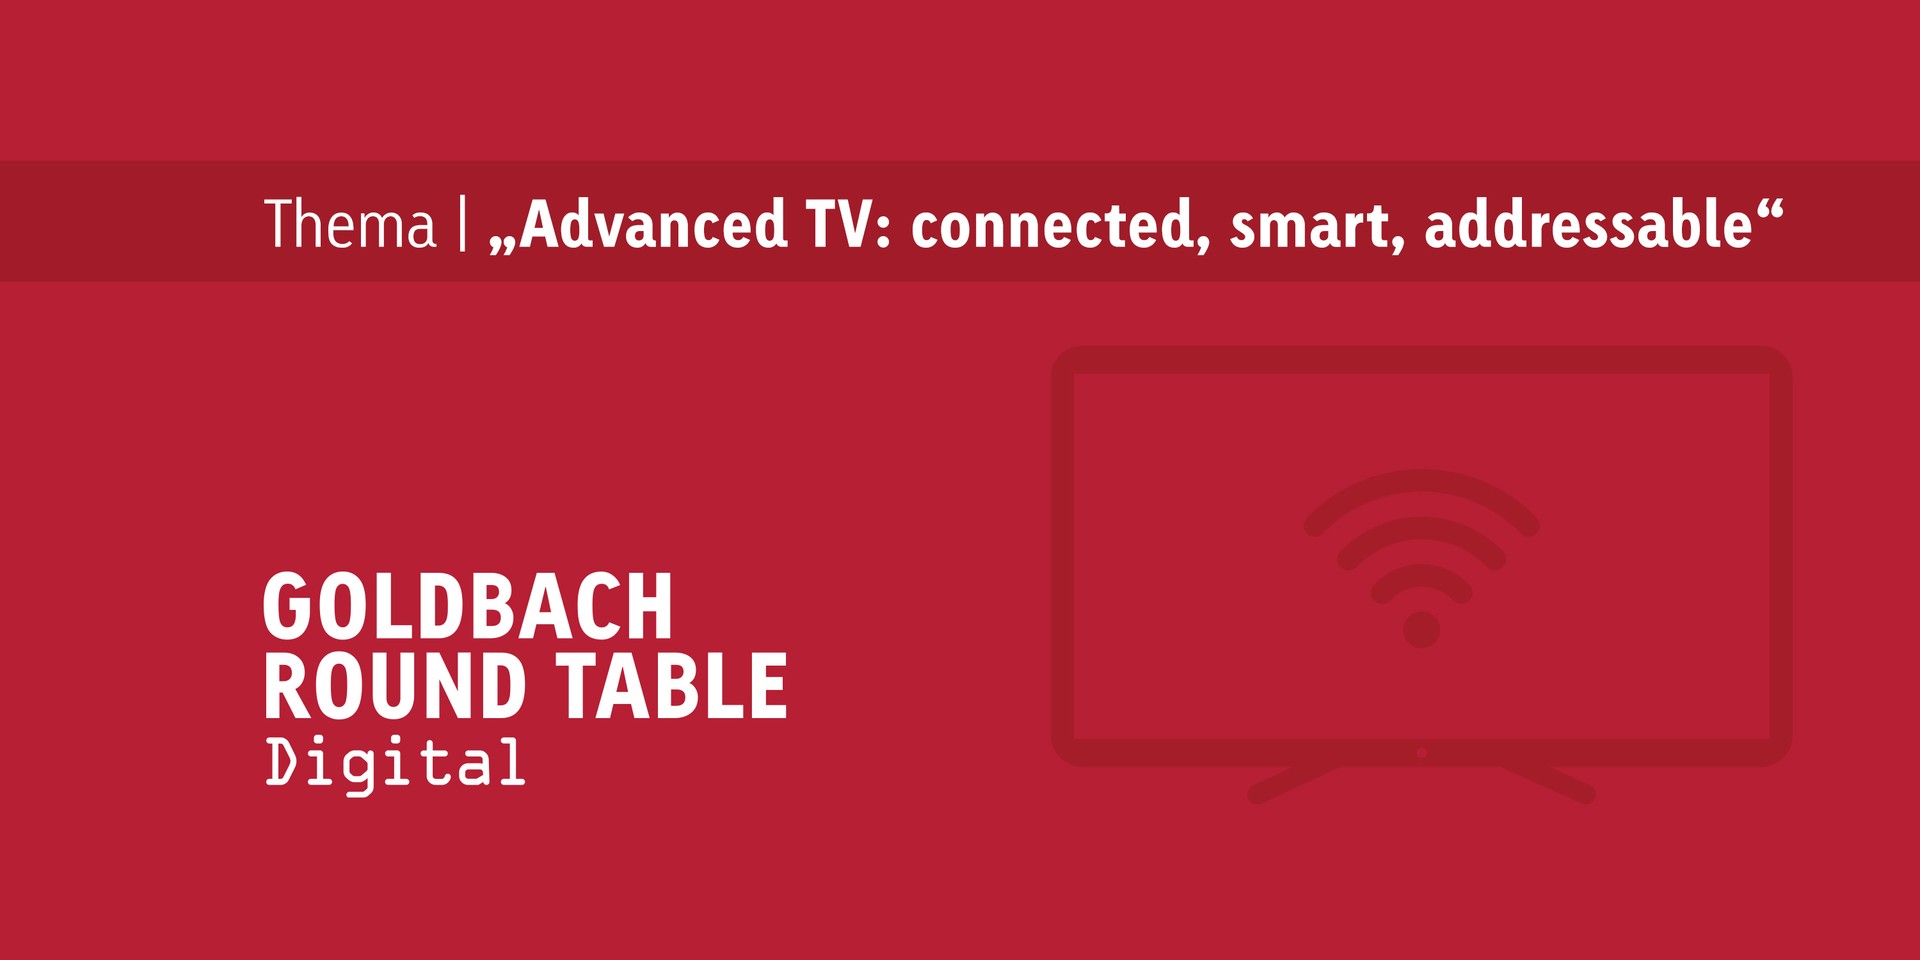 Visual Goldbach Round Table roter Hintergrund mit Text "Thema Advanced TV: connected, smart, addressable"